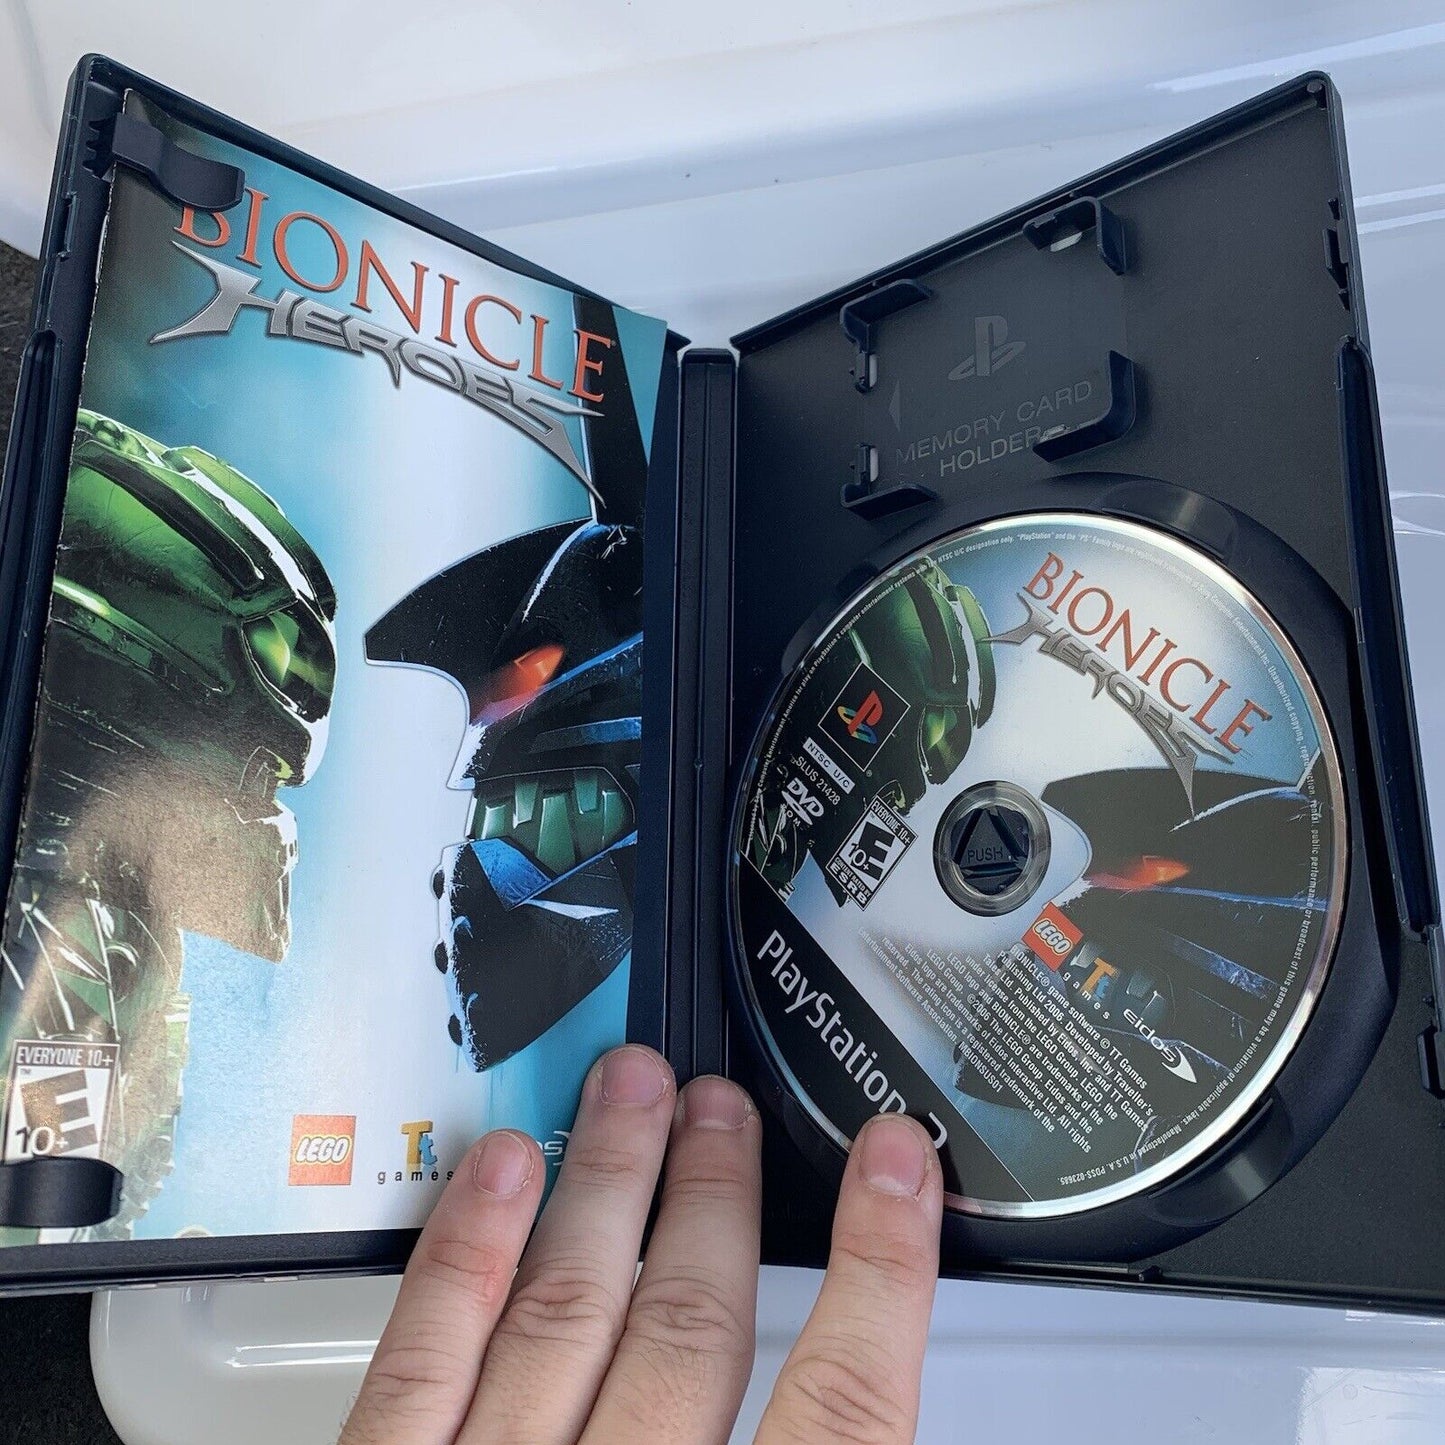 Bionicle Heroes PS2 Game Complete